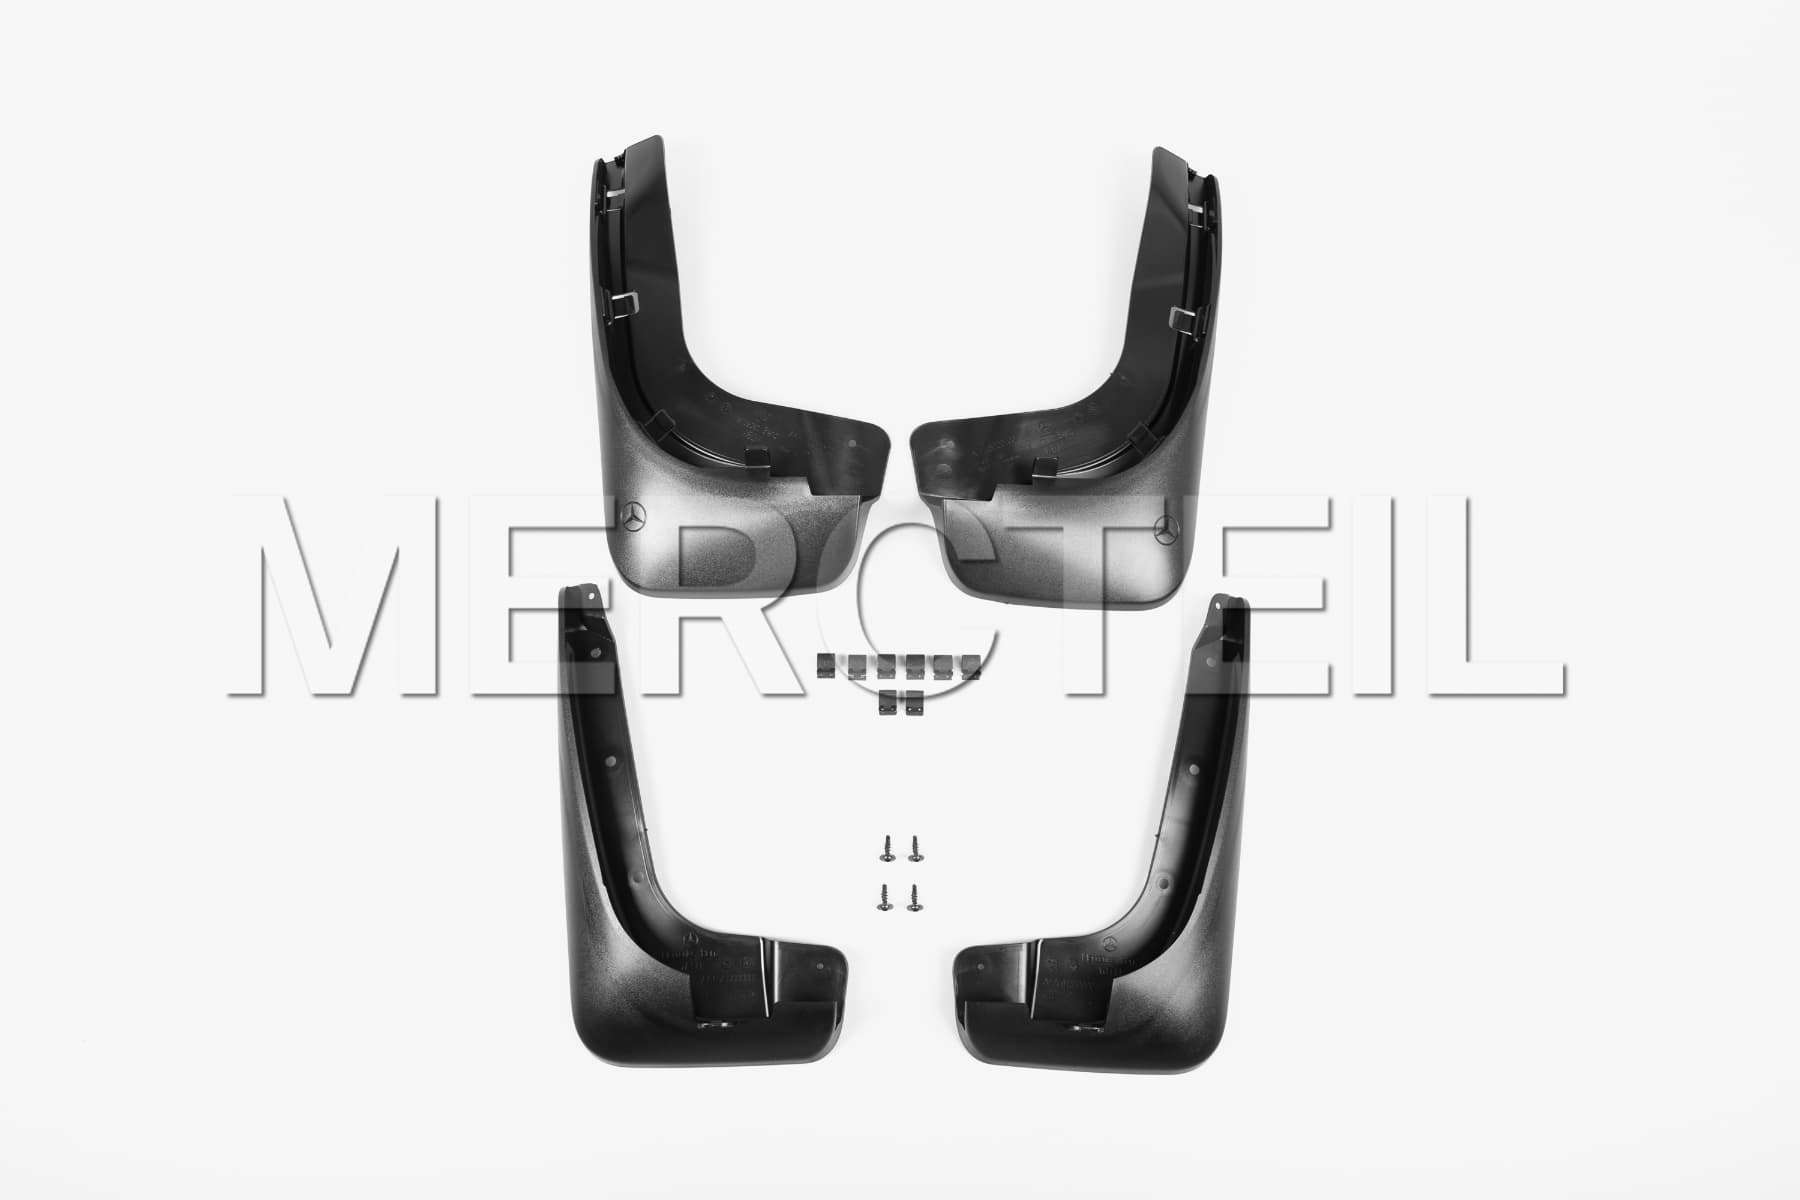 V-Class / Vito Mud Flaps Set for Front and Rear Axles W447 Genuine Mercedes-Benz (Part number: A4478900000)